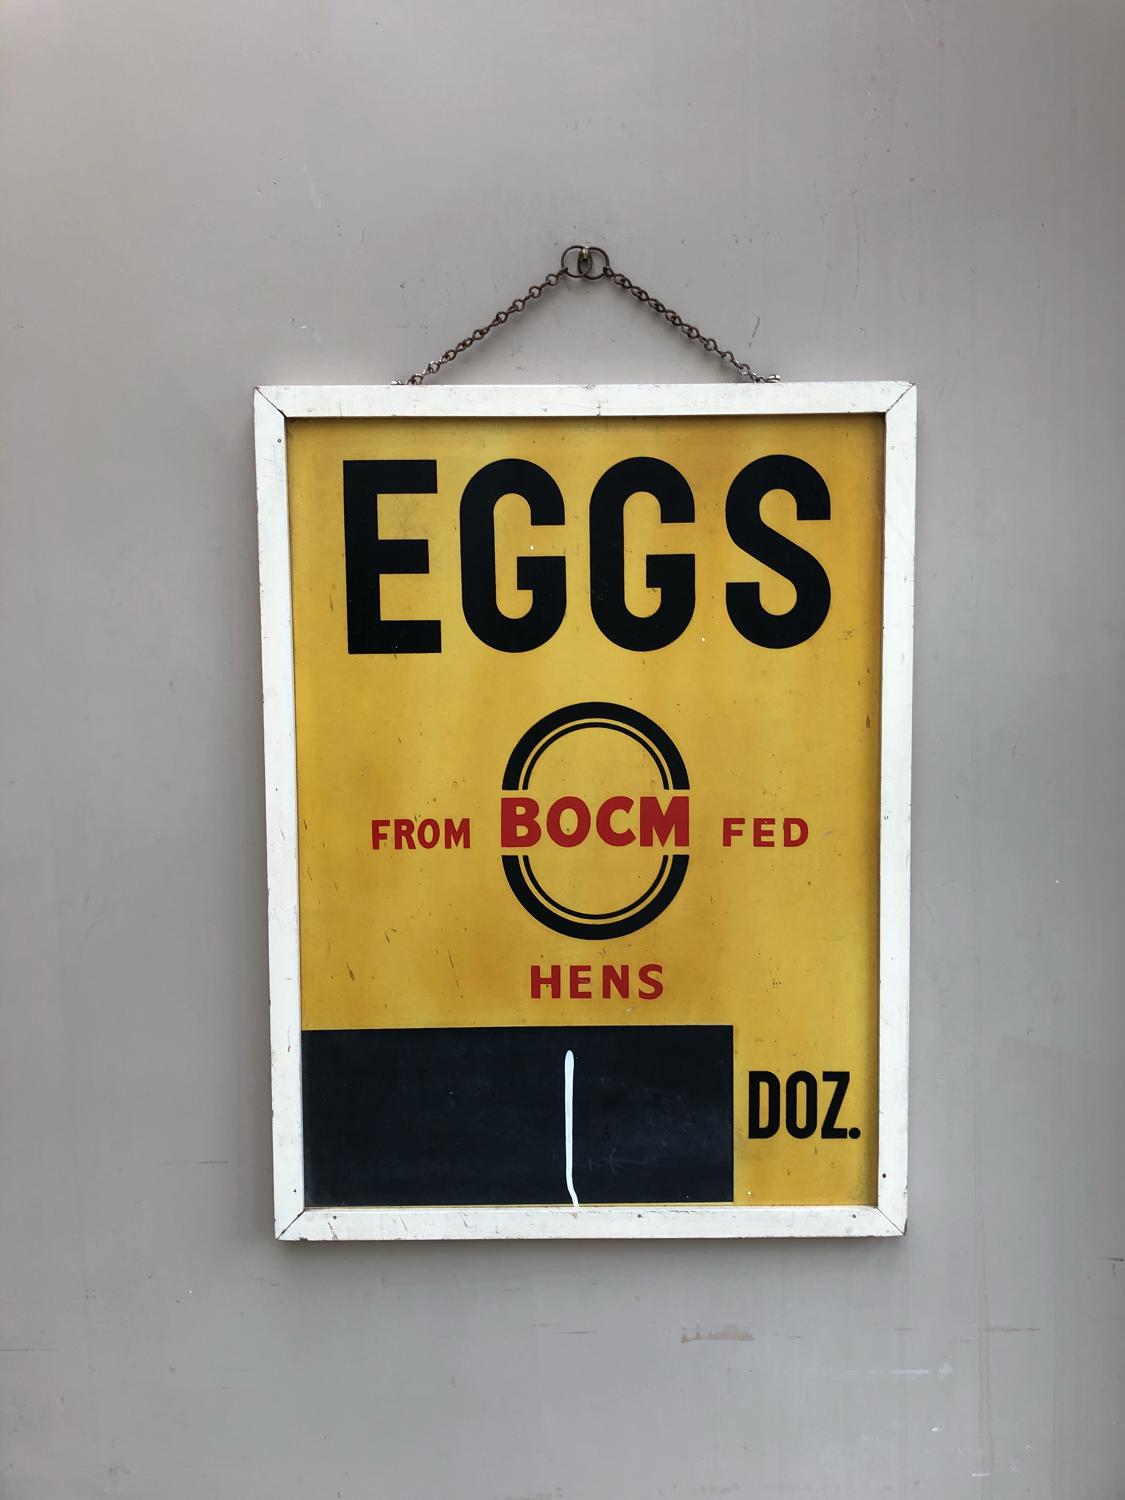 Mid Century Shops Wall Hung Eggs For Sale Price Sign